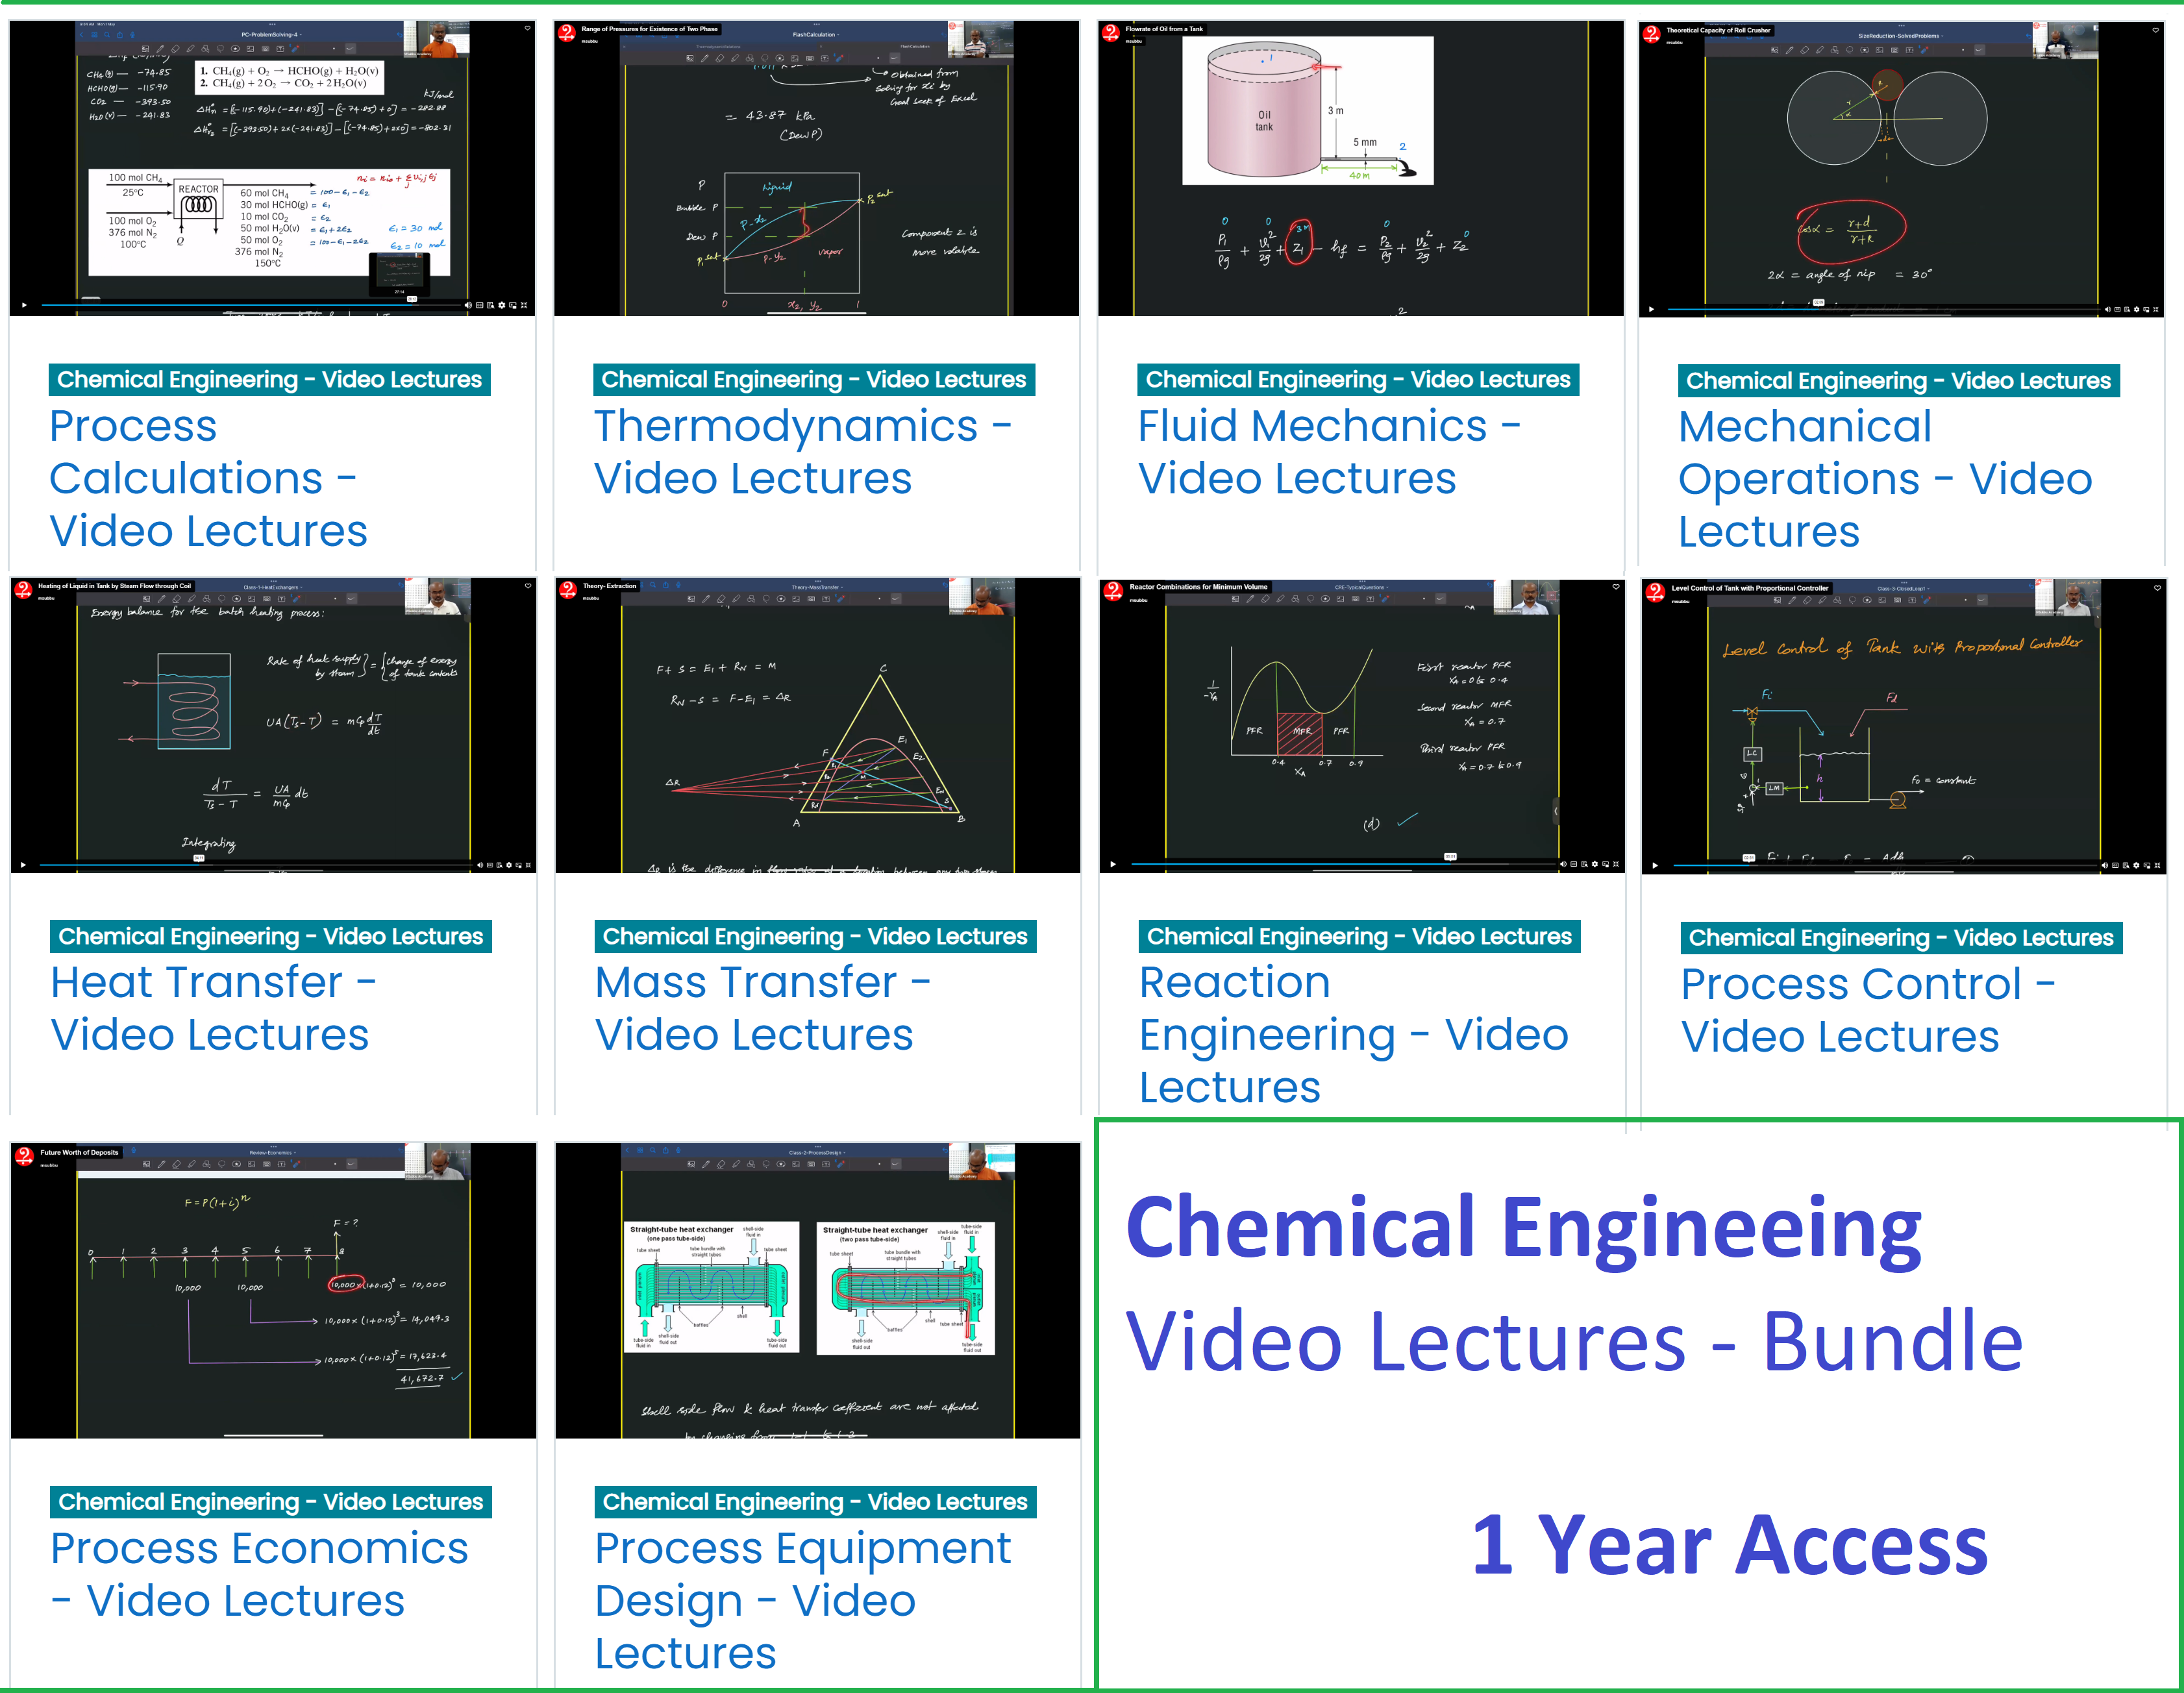 Chemical Engineering Video Lectures Bundle - 1 Year Access